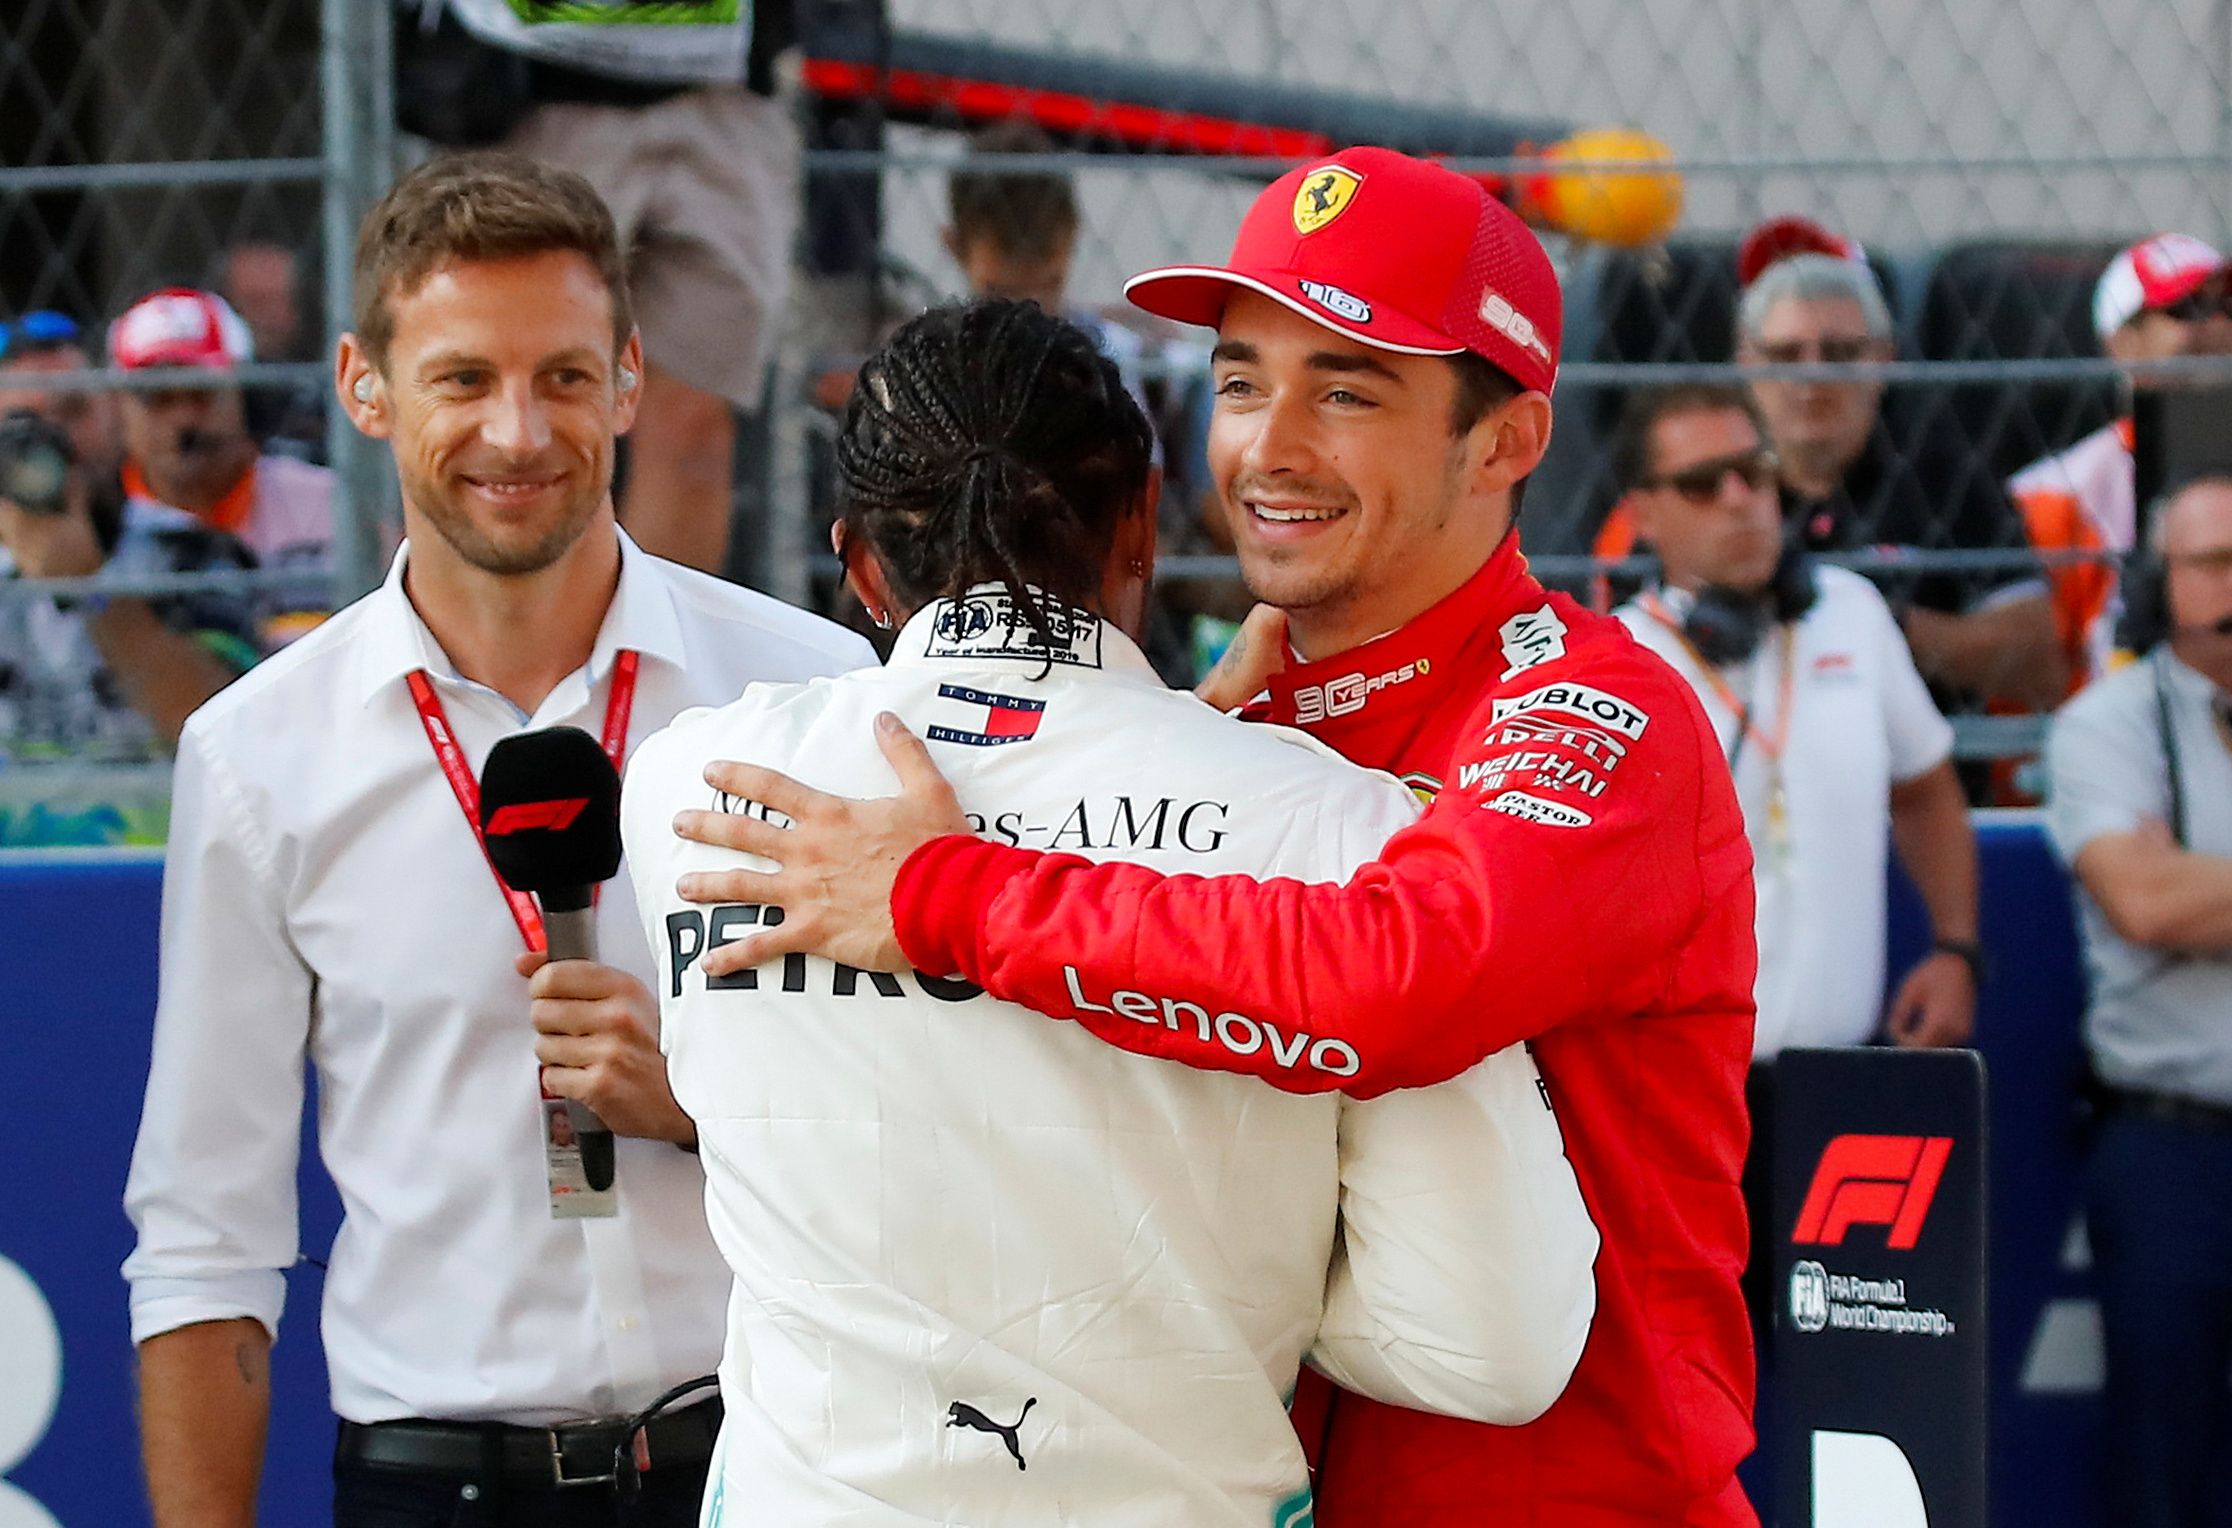 Formula One F1 - Russian Grand Prix - Sochi Autodrom, Sochi, Russia - September 28, 2019   After qualifying in pole position Ferrari's Charles Leclerc shakes hands with second placed Mercedes' Lewis Hamilton as Jenson Button looks on   REUTERS/Maxim Shemetov